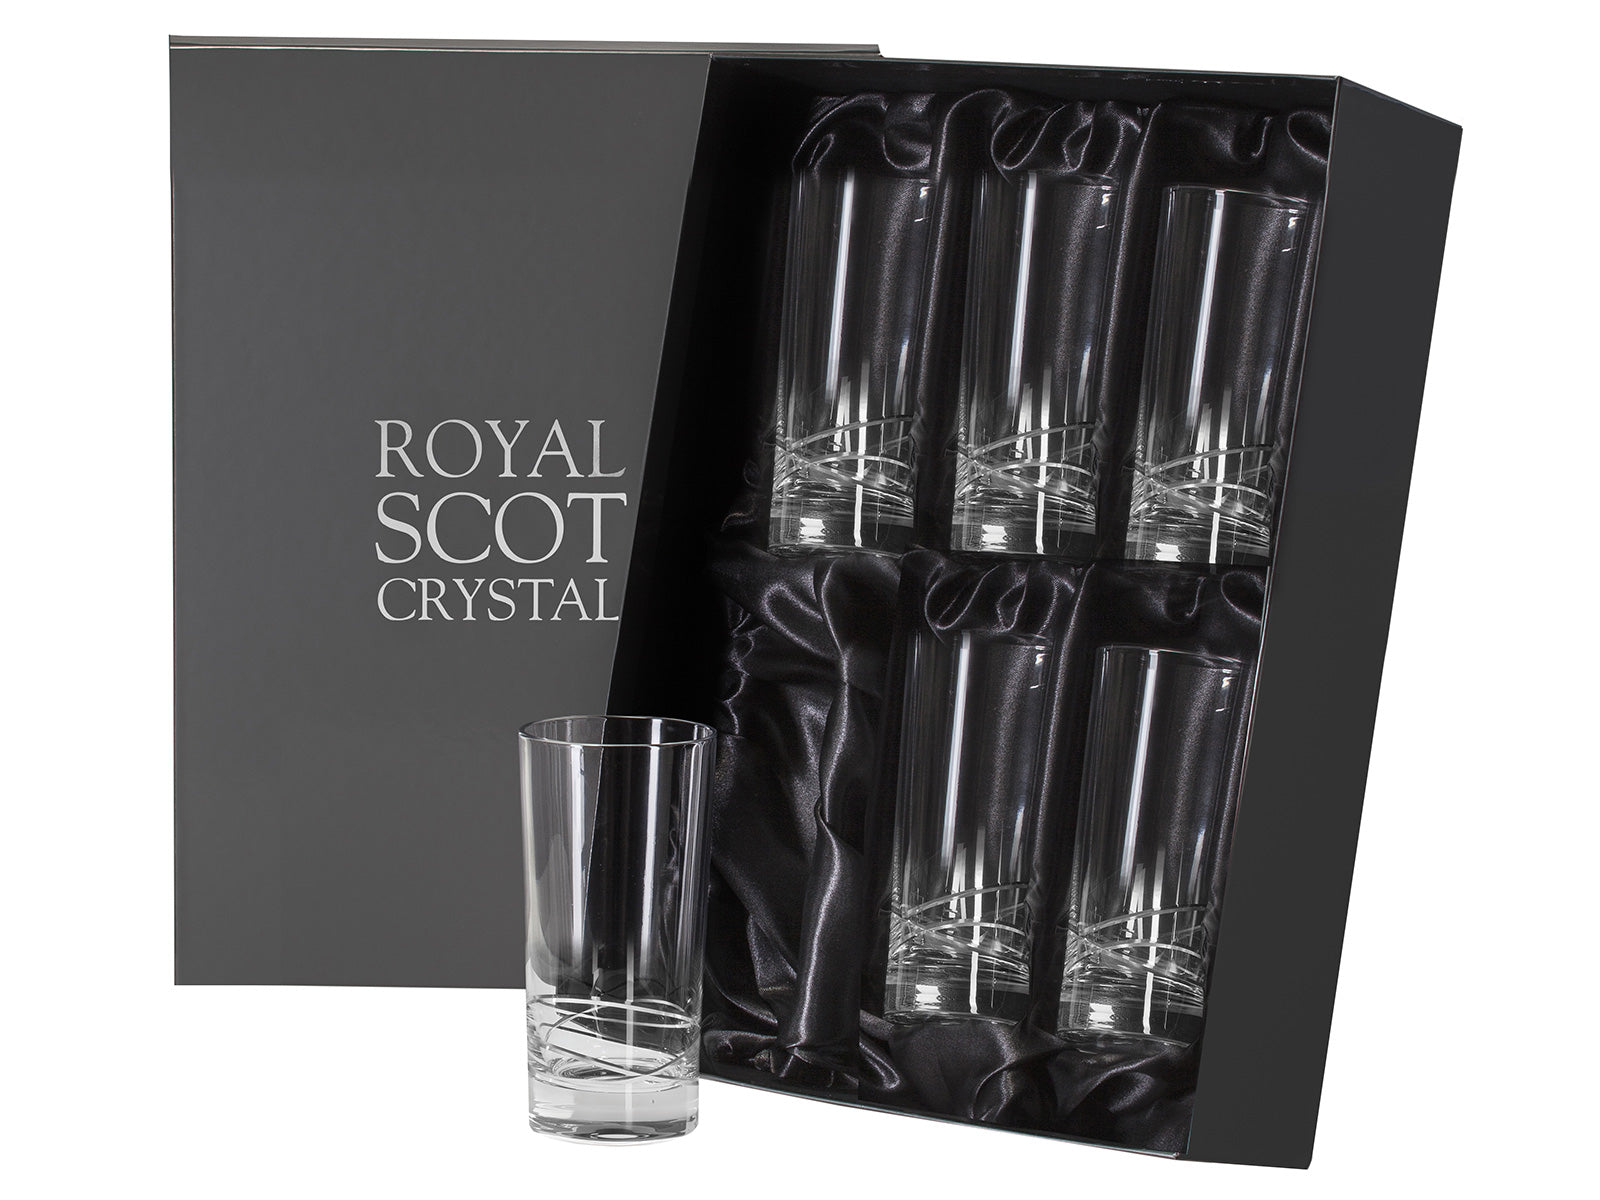 A set of six matching crystal highball tumblers with an orbital design cut around the base. They come in a gunmetal presentation box.